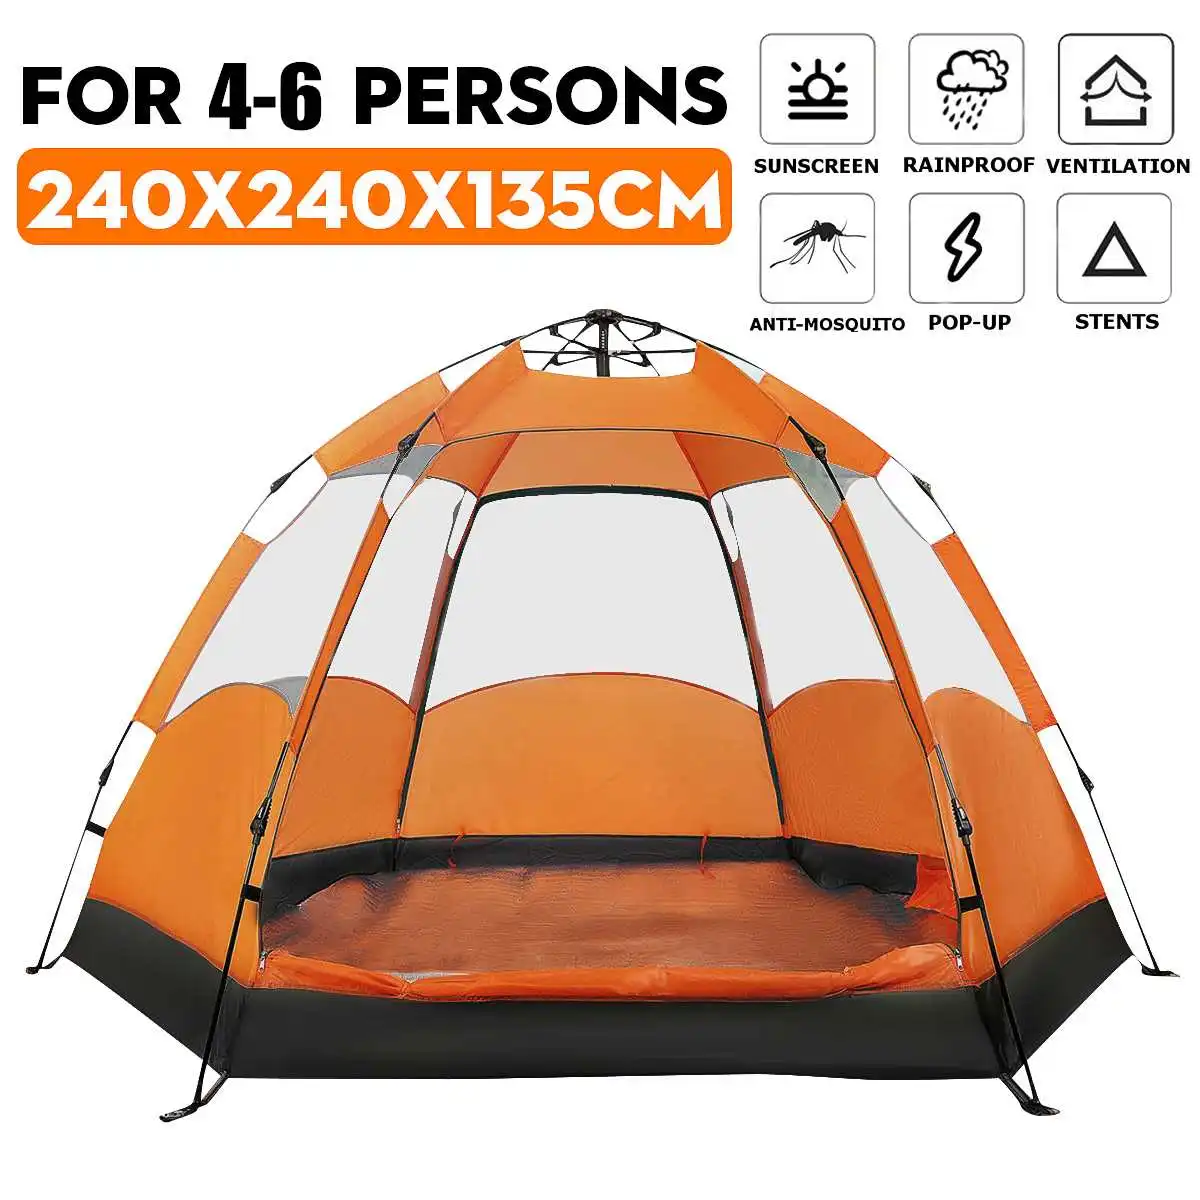 4-6 People Capcity Automatic Waterproof Portable Travel Camping Hiking Double Layer Outdoor Tent for Big Family 4 Seasons